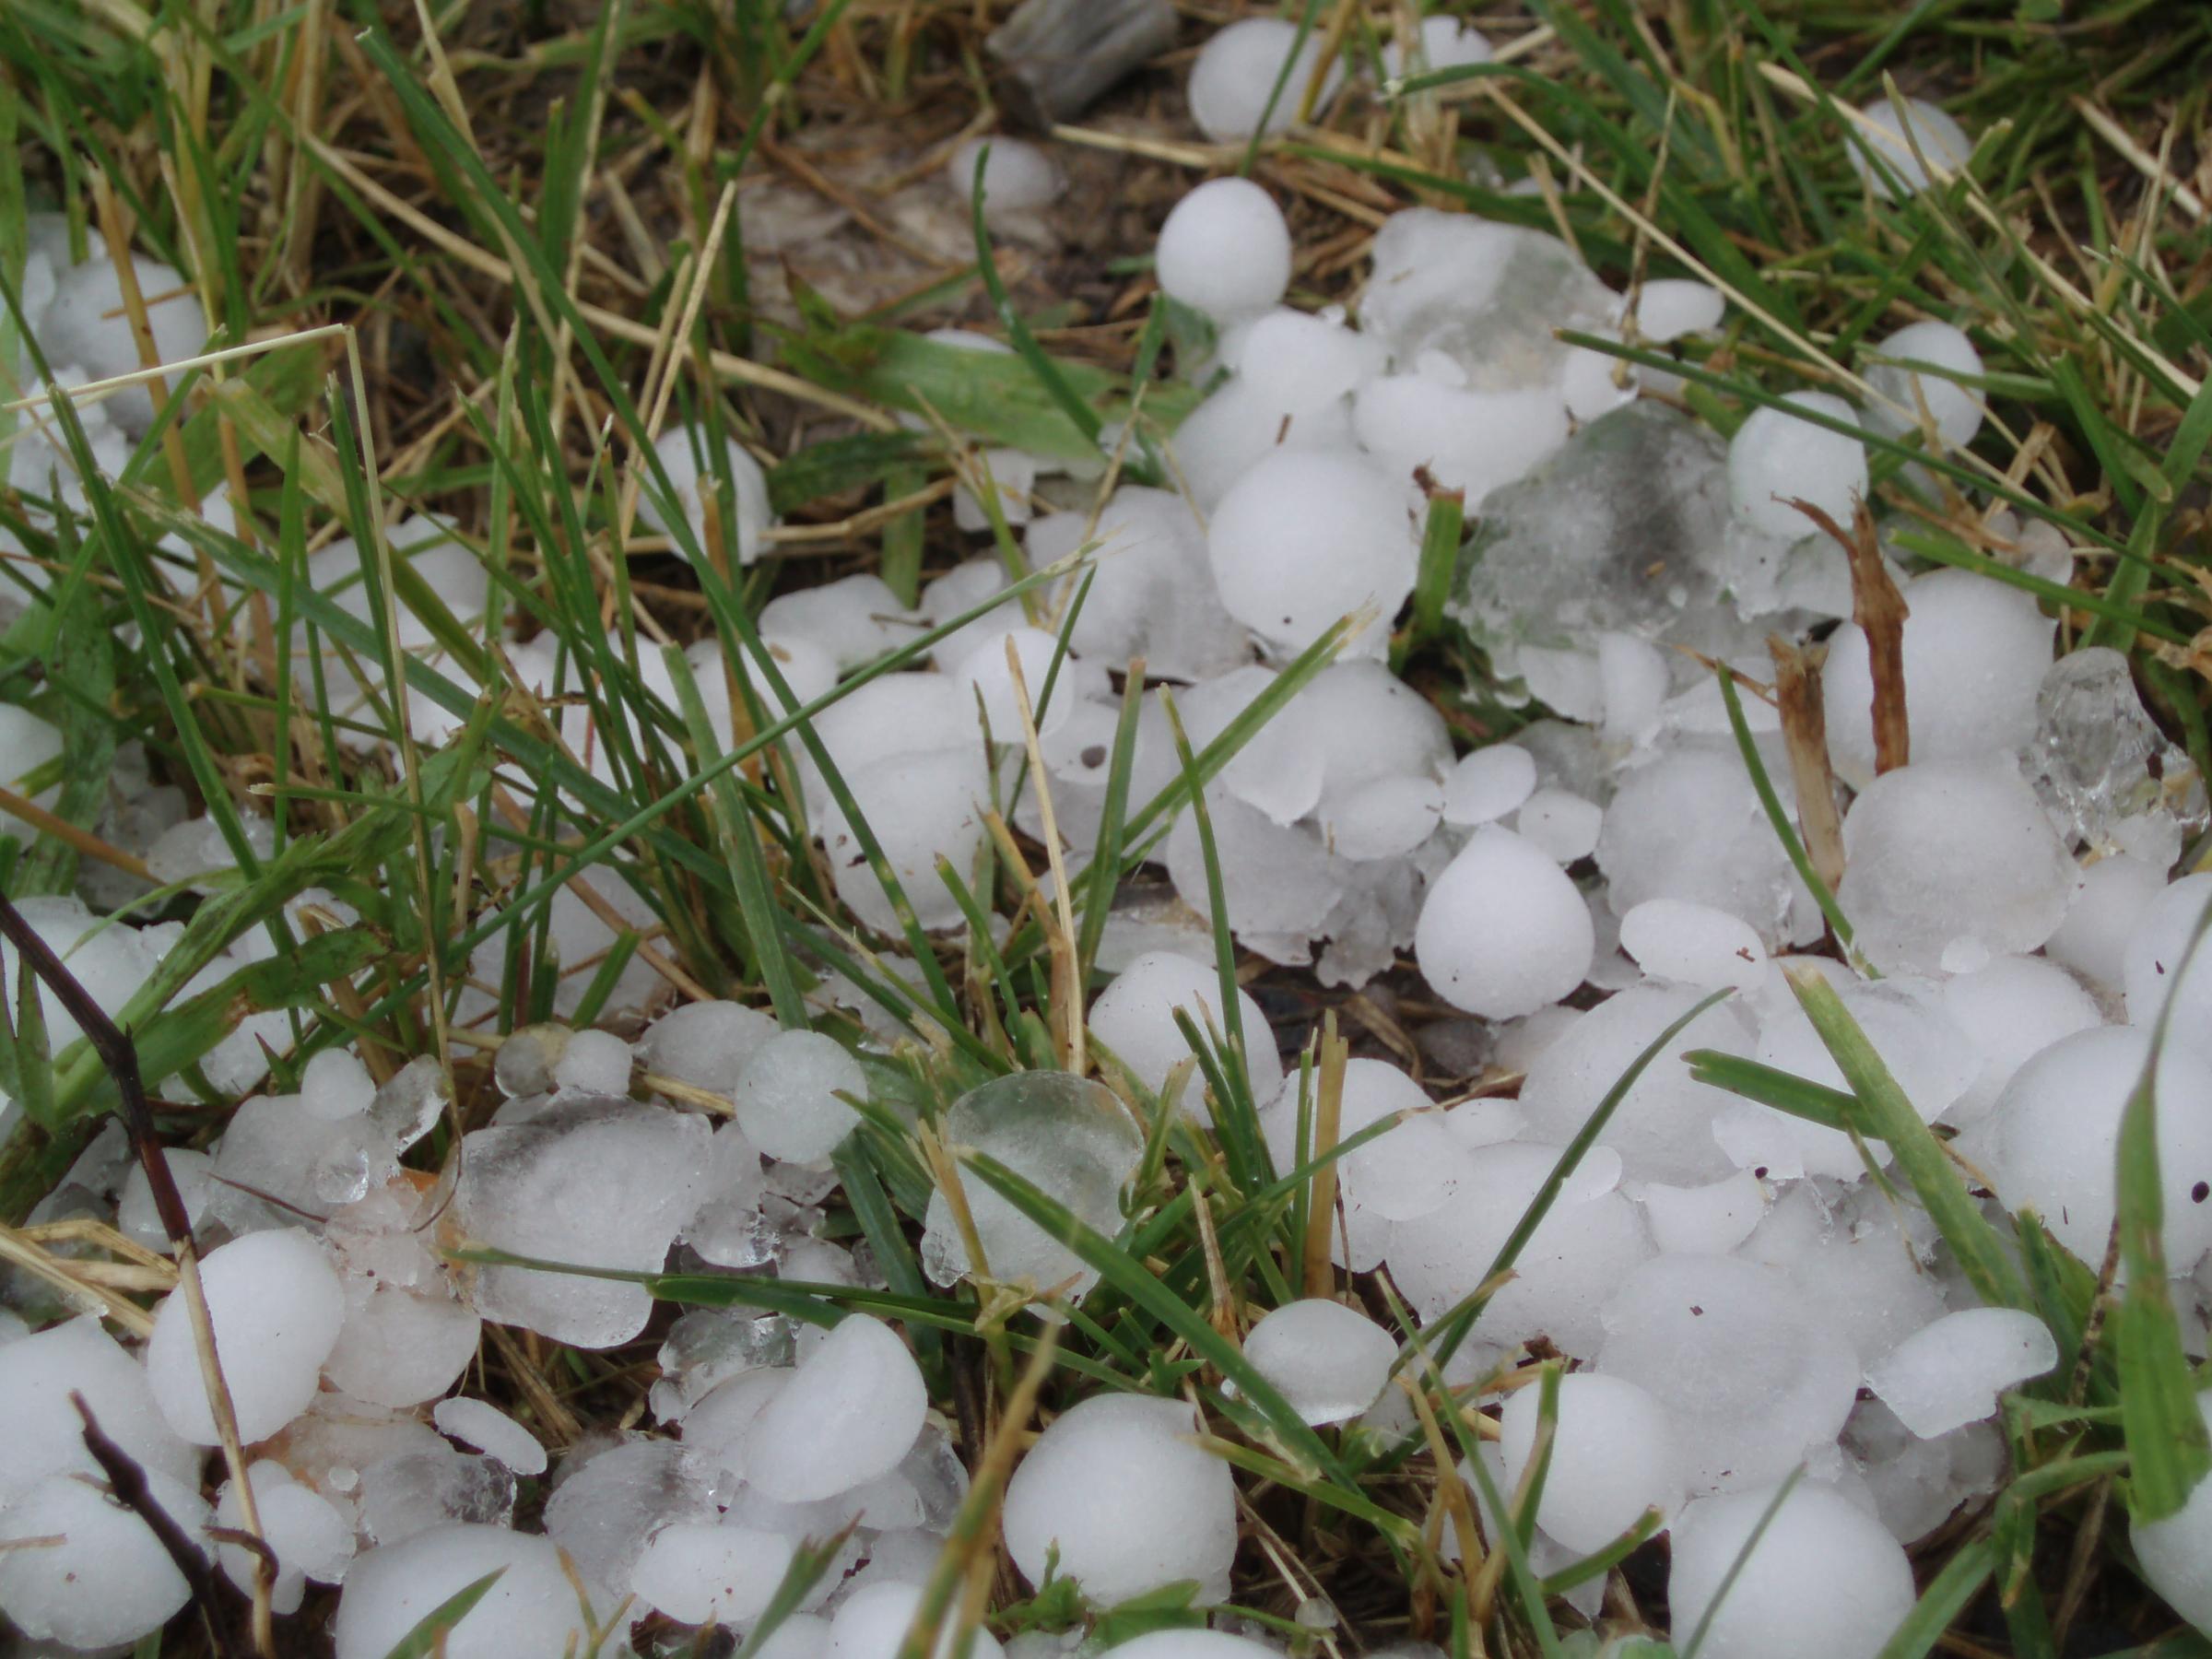 Michigan farmers can get loan help after hail storms | Michigan Radio